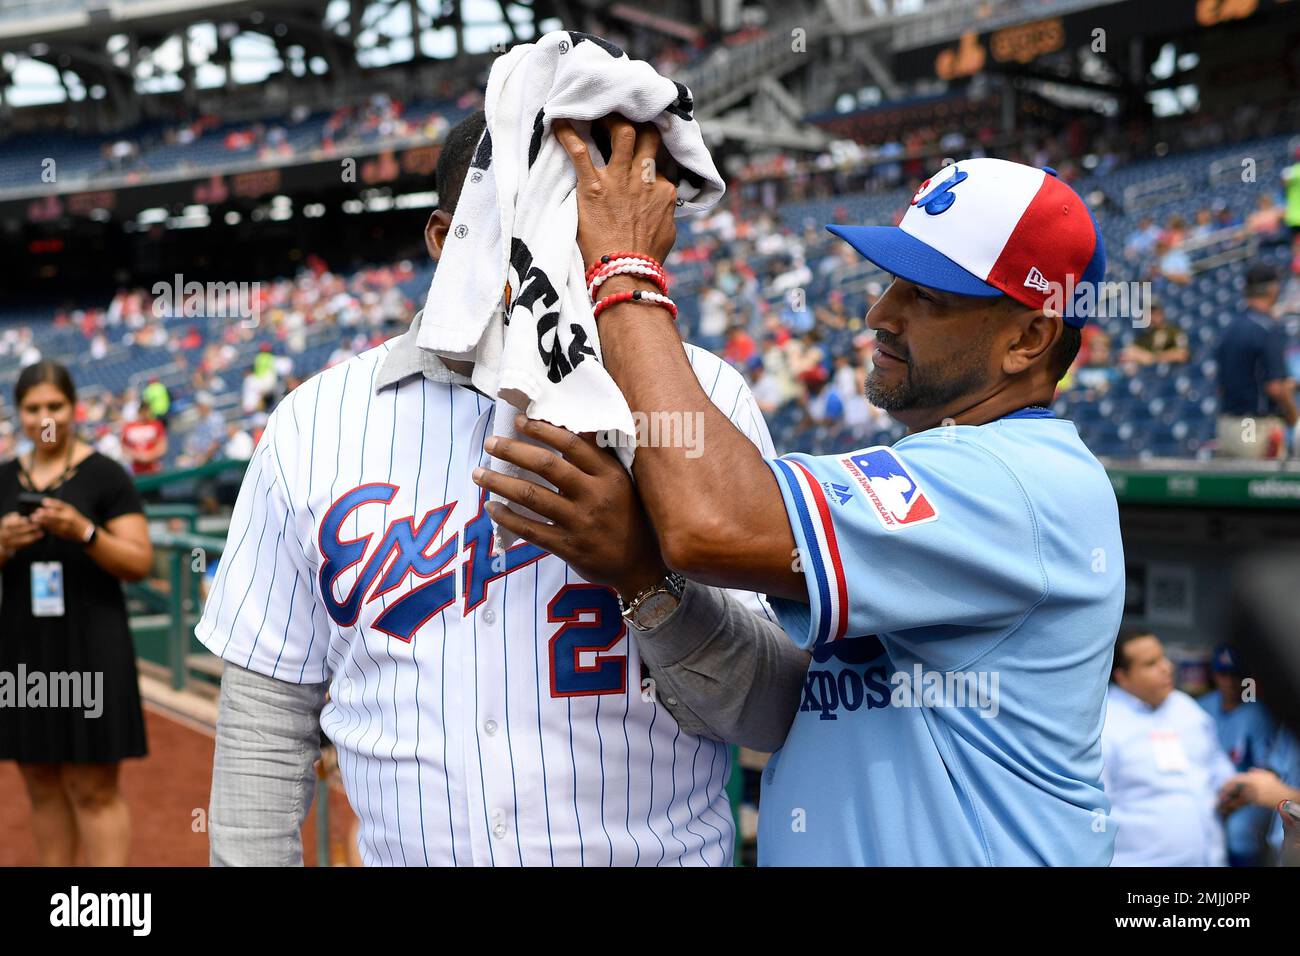 Washington Nationals manager Dave Martinez, right, wipes the face of  Baseball Hall of Famer Vladimir Guerrero, left, with a towel before a  baseball game against the Kansas City Royals, Saturday, July 6